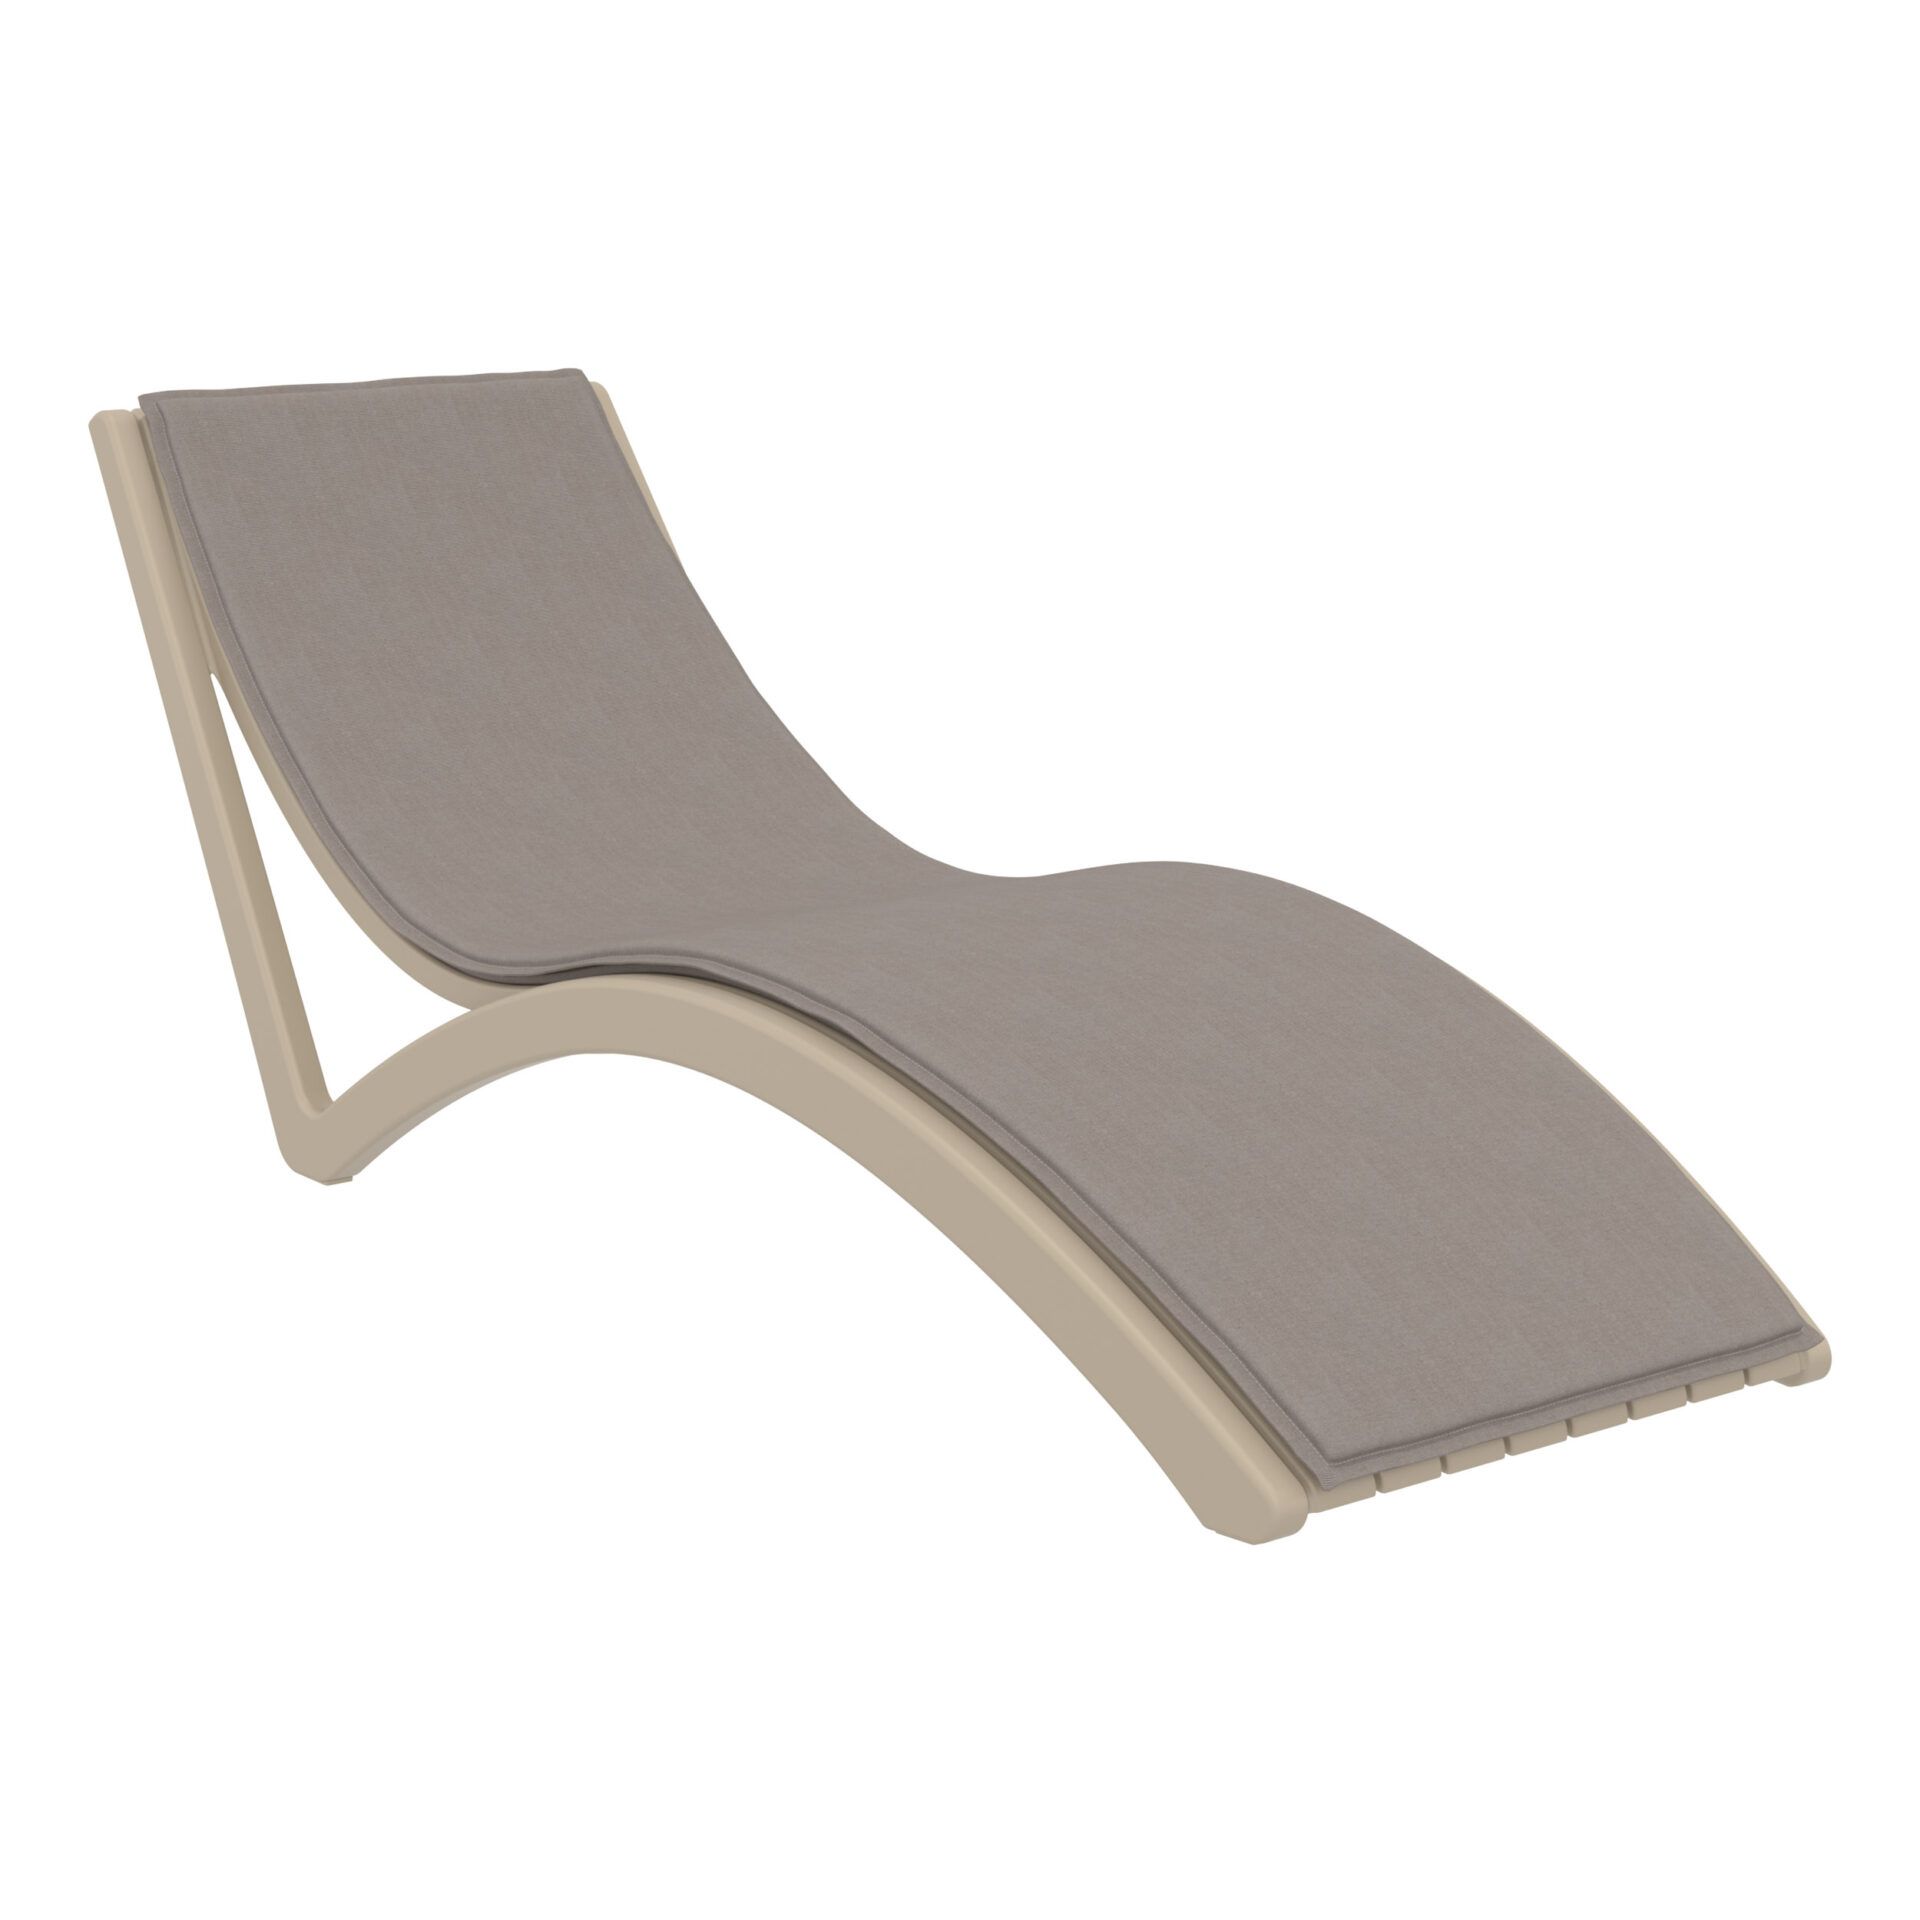 outdoor polypropylene slim sunlounger cushion taupe brown front side